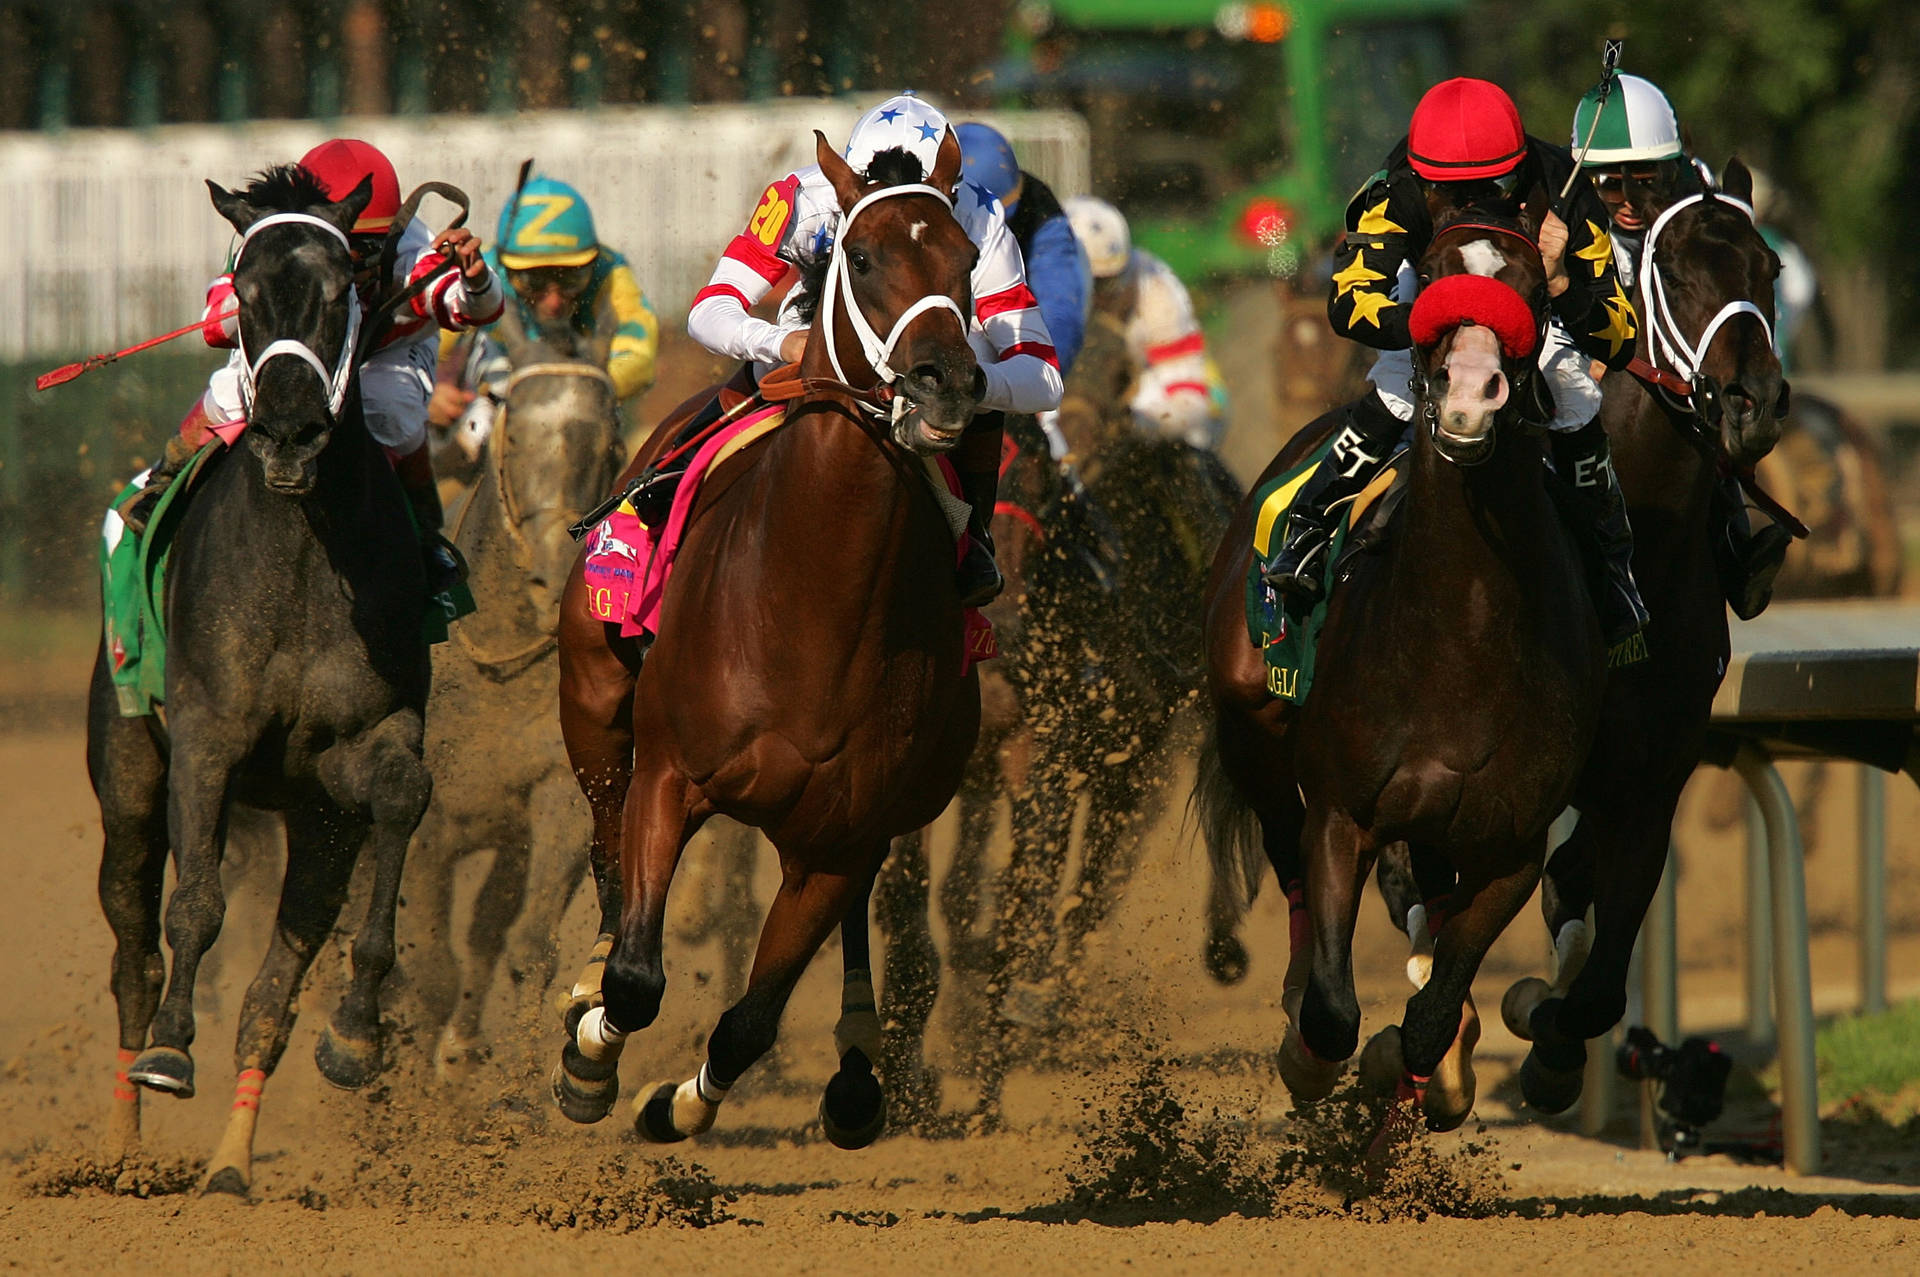 California Chrome crosses the finish line to become the 12th Triple Crown winner Wallpaper